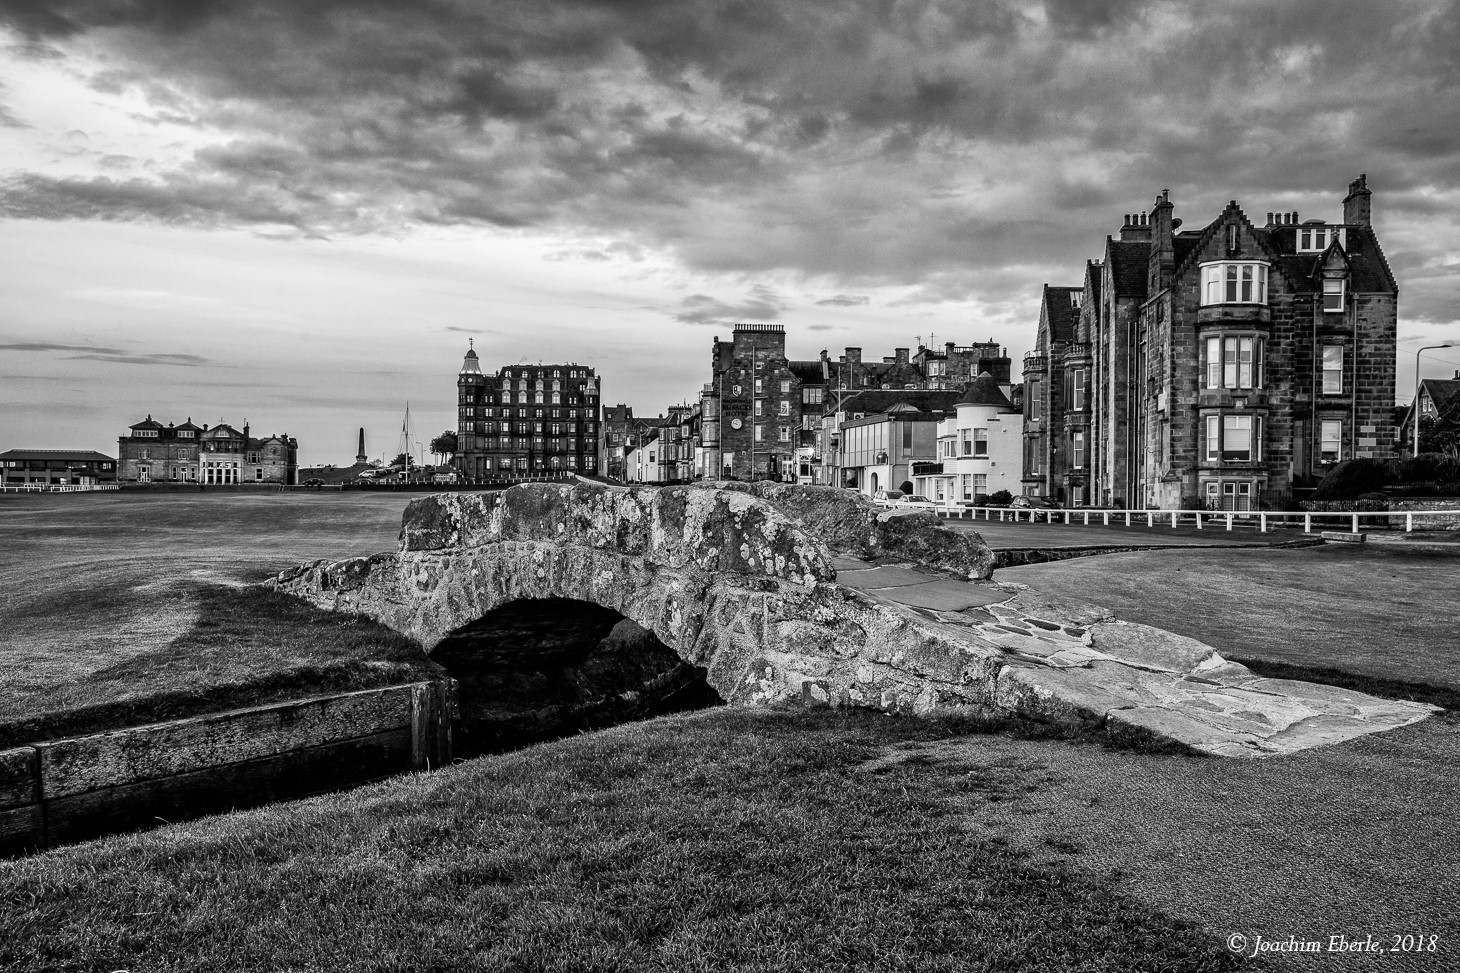 St Andrews Golf Club, Scotland - Immerse yourself in the prestigious St Andrews Golf Club, Scotland, with PGA Professionals offering Golf Tours to the legendary Old Course.